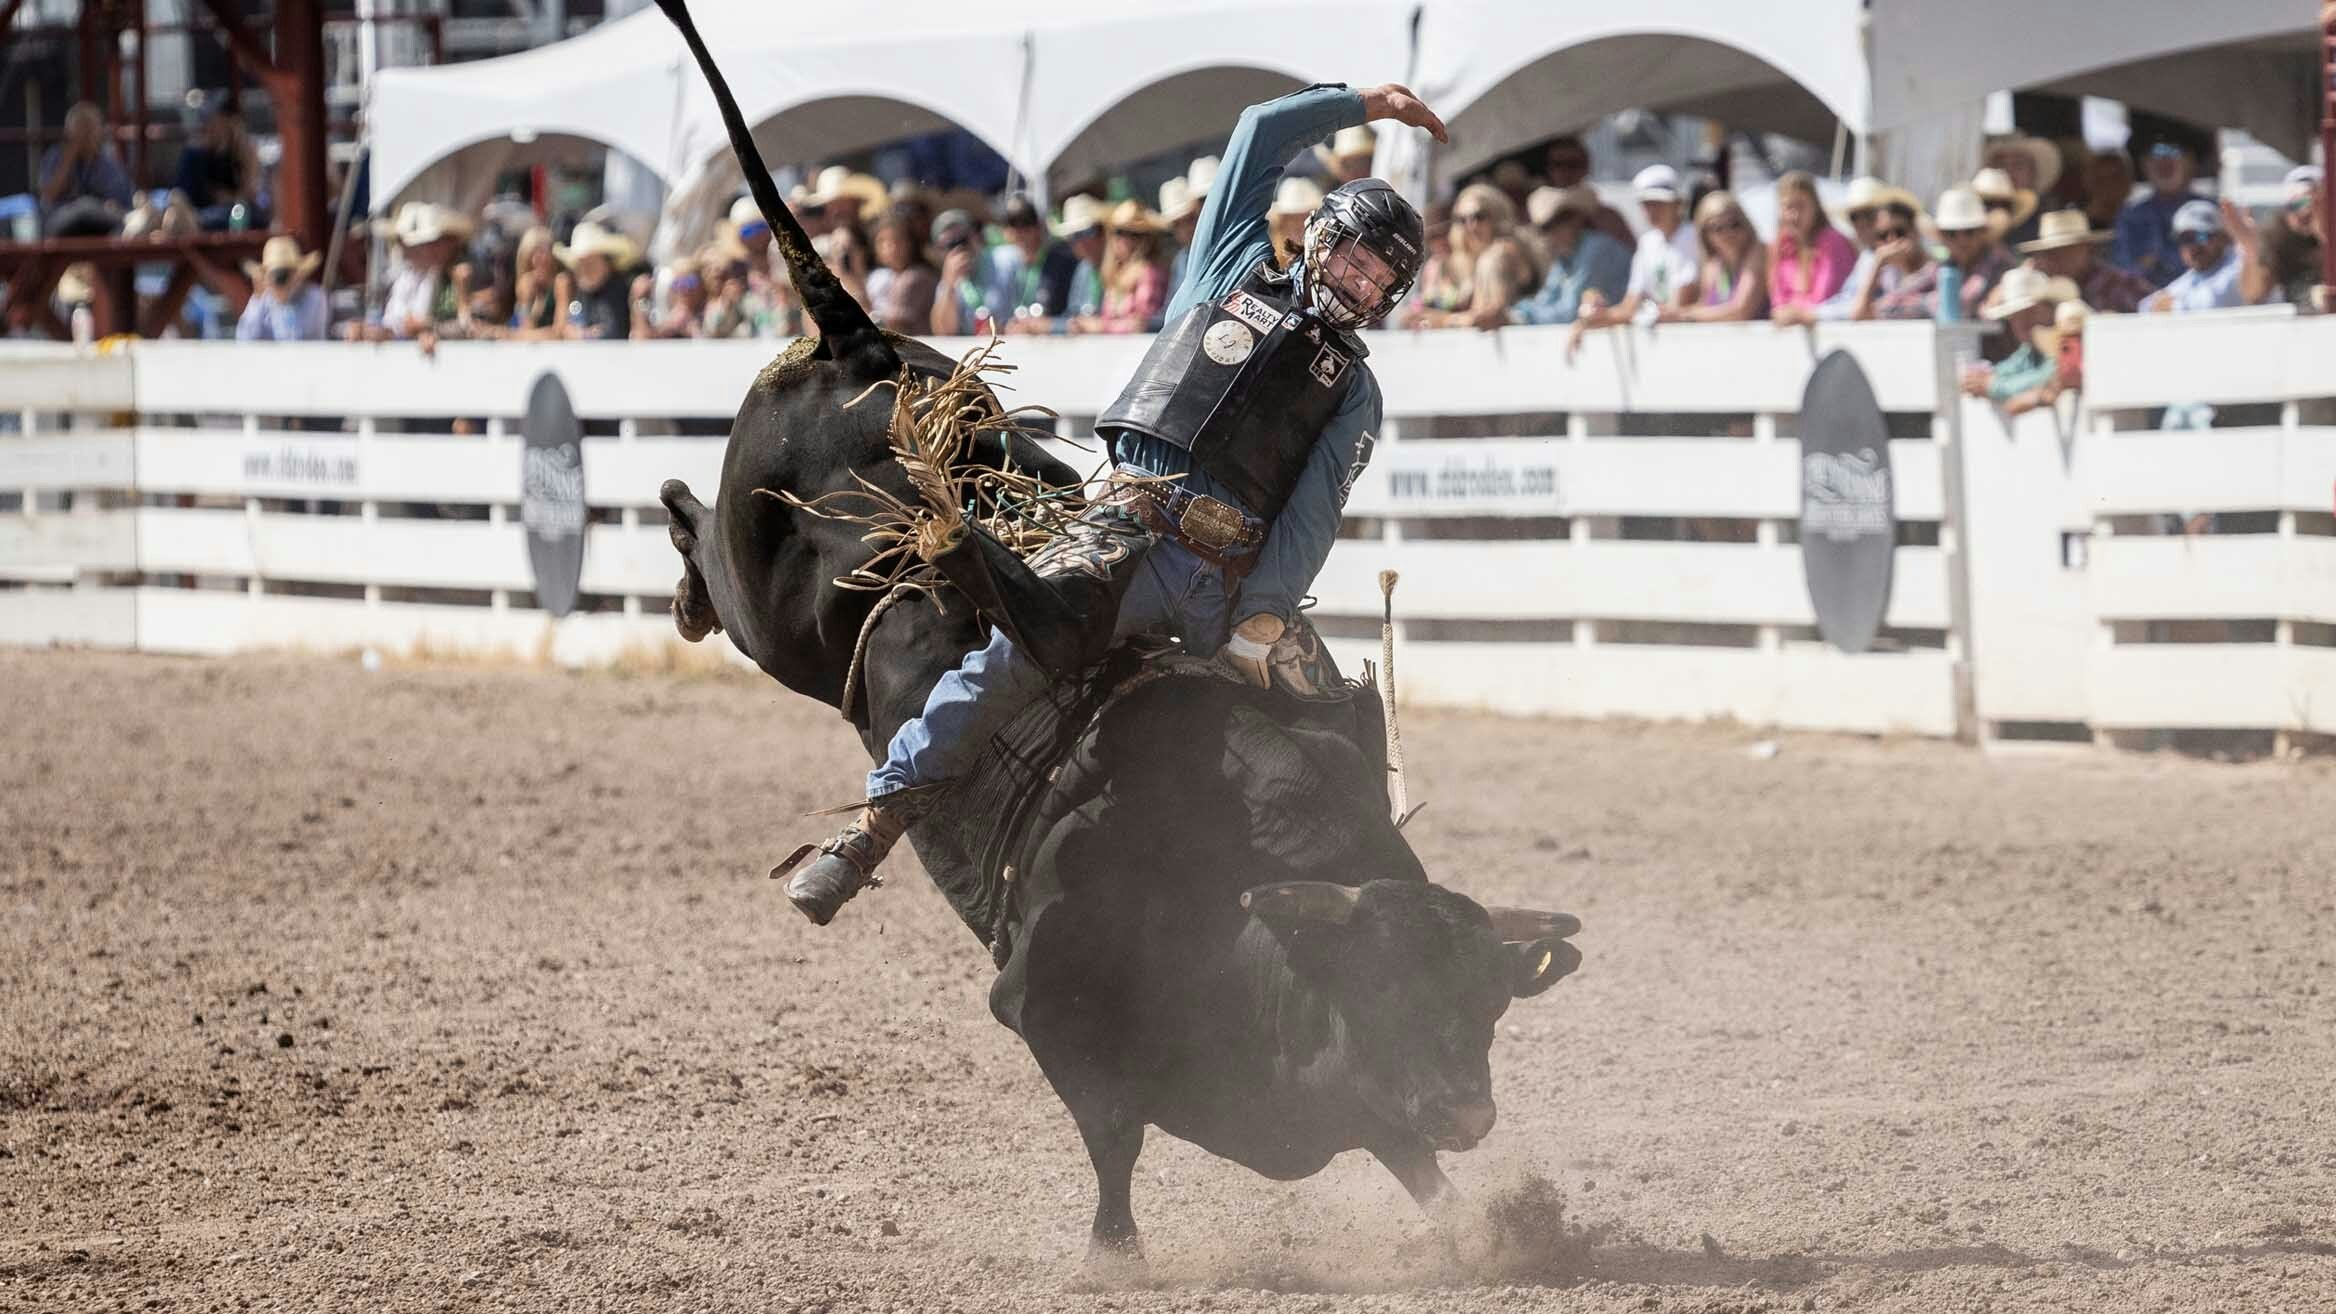 Fulton Rutland from Westville, OK rides his bull for a score of 87 points in the bull riding at Cheyenne Frontier Days on July 25, 2023.